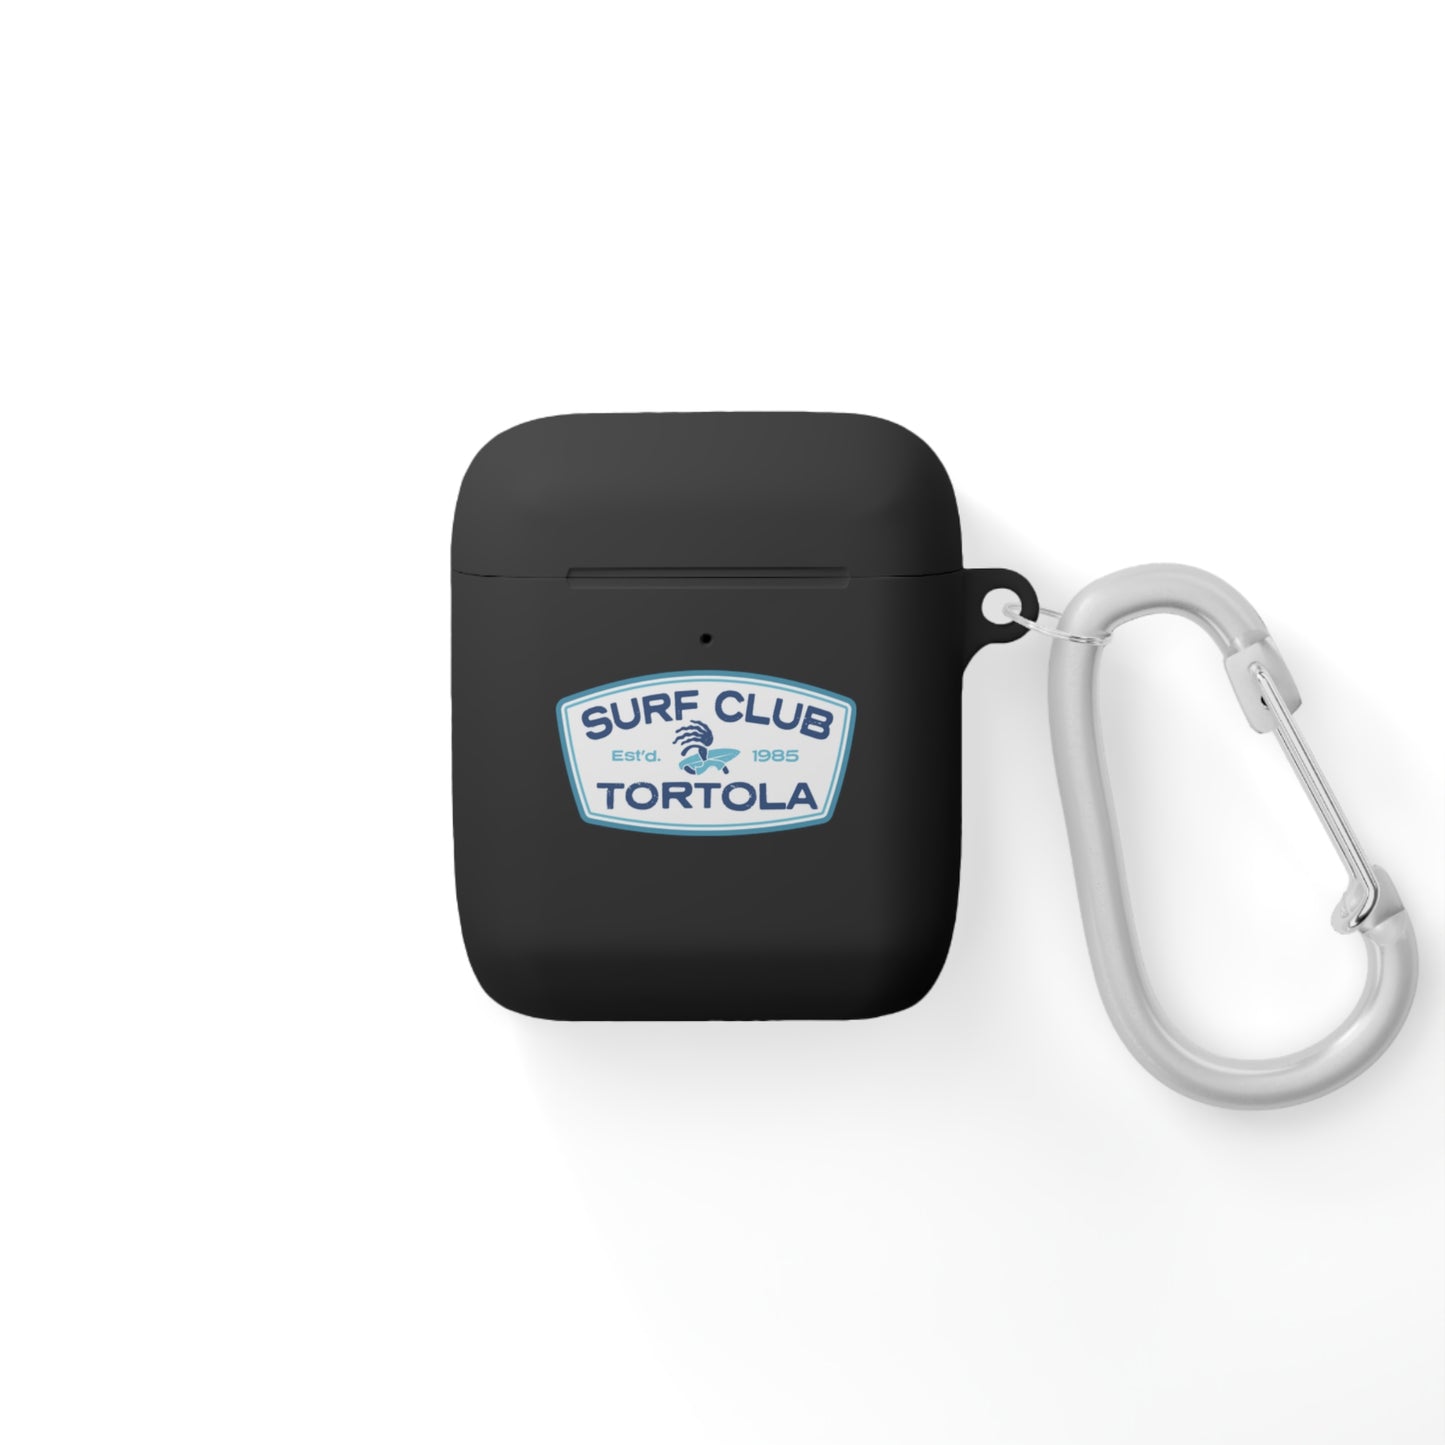 "Surf Club Tortola” AirPods and AirPods Pro Case Cover